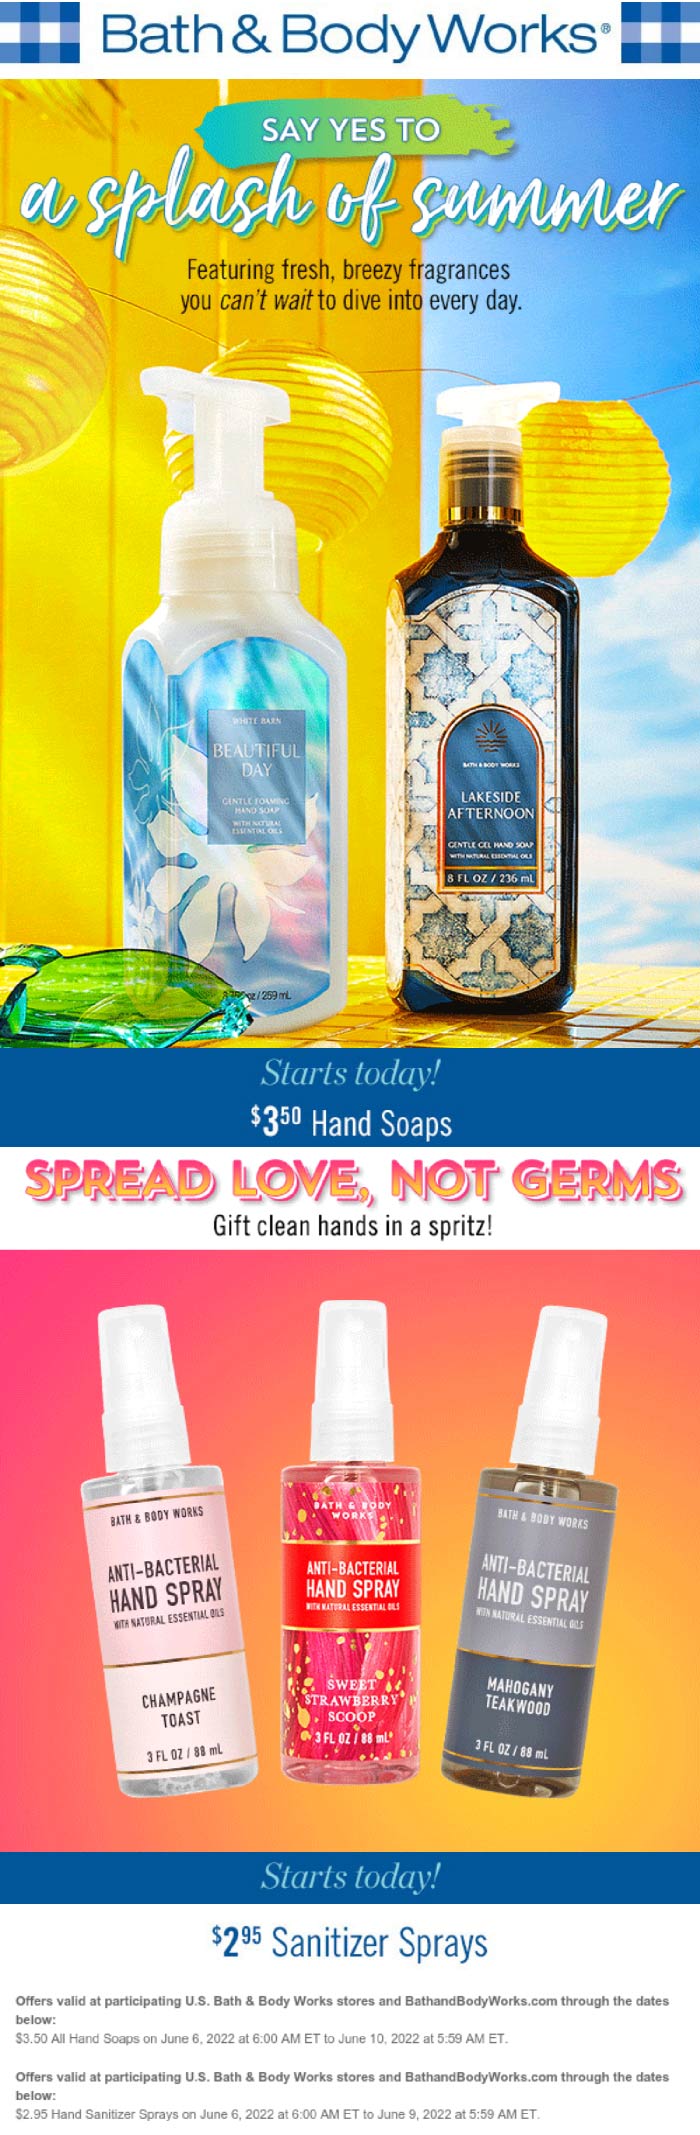 Bath & Body Works stores Coupon  $3.50 hand soaps & $3 hand sanitizer at Bath & Body Works, ditto online #bathbodyworks 